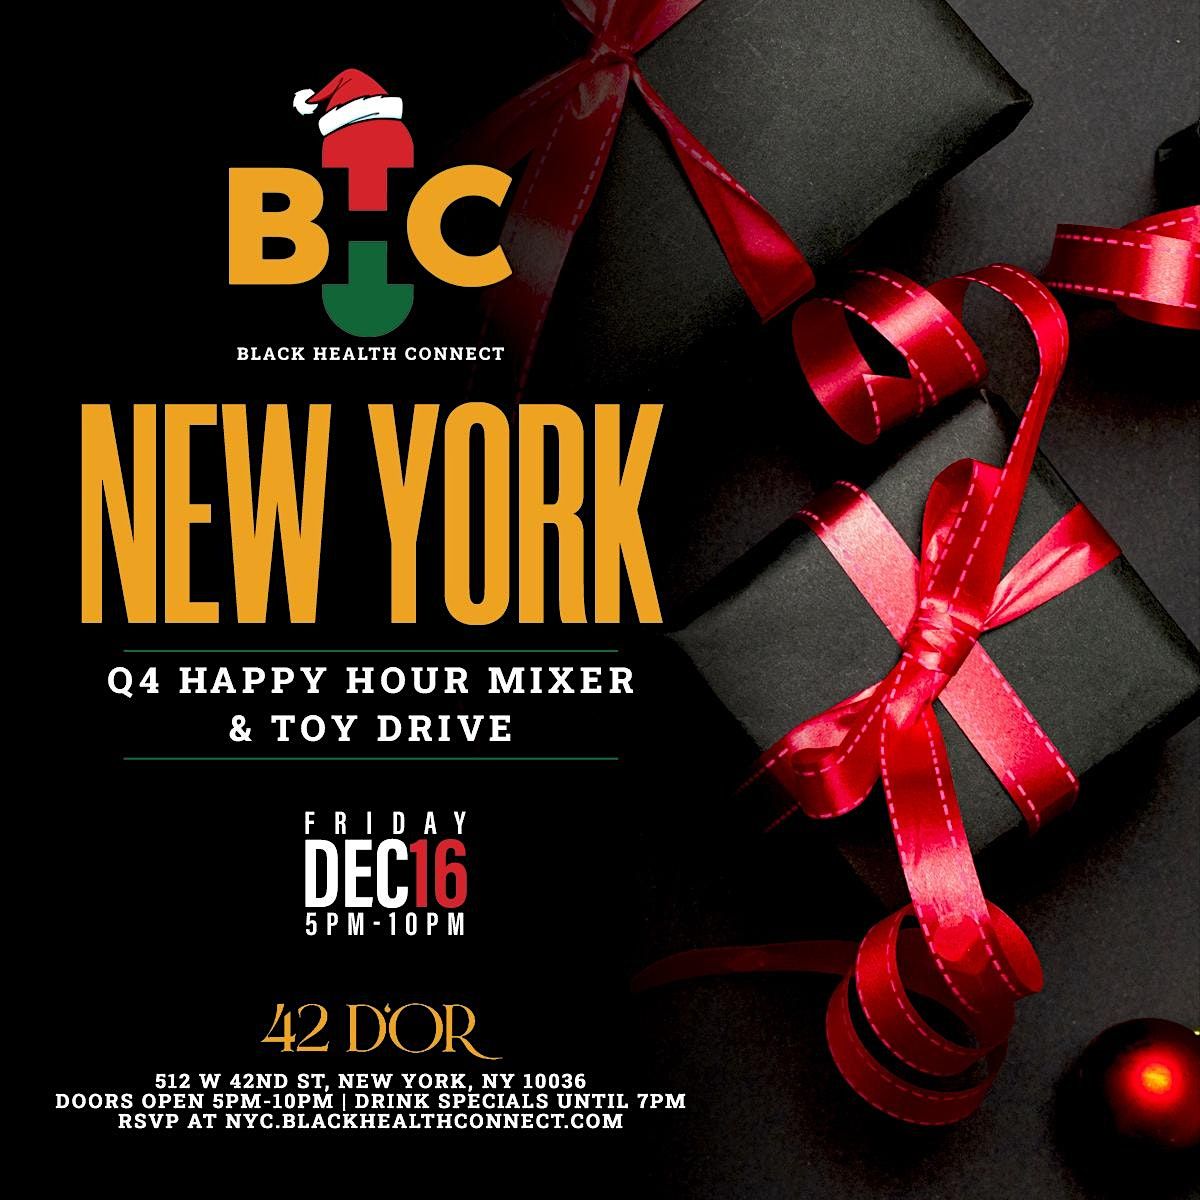 Black Health Connect NYC Q4 Mixer + Toy Drive, 42 d'Or, New York, 16